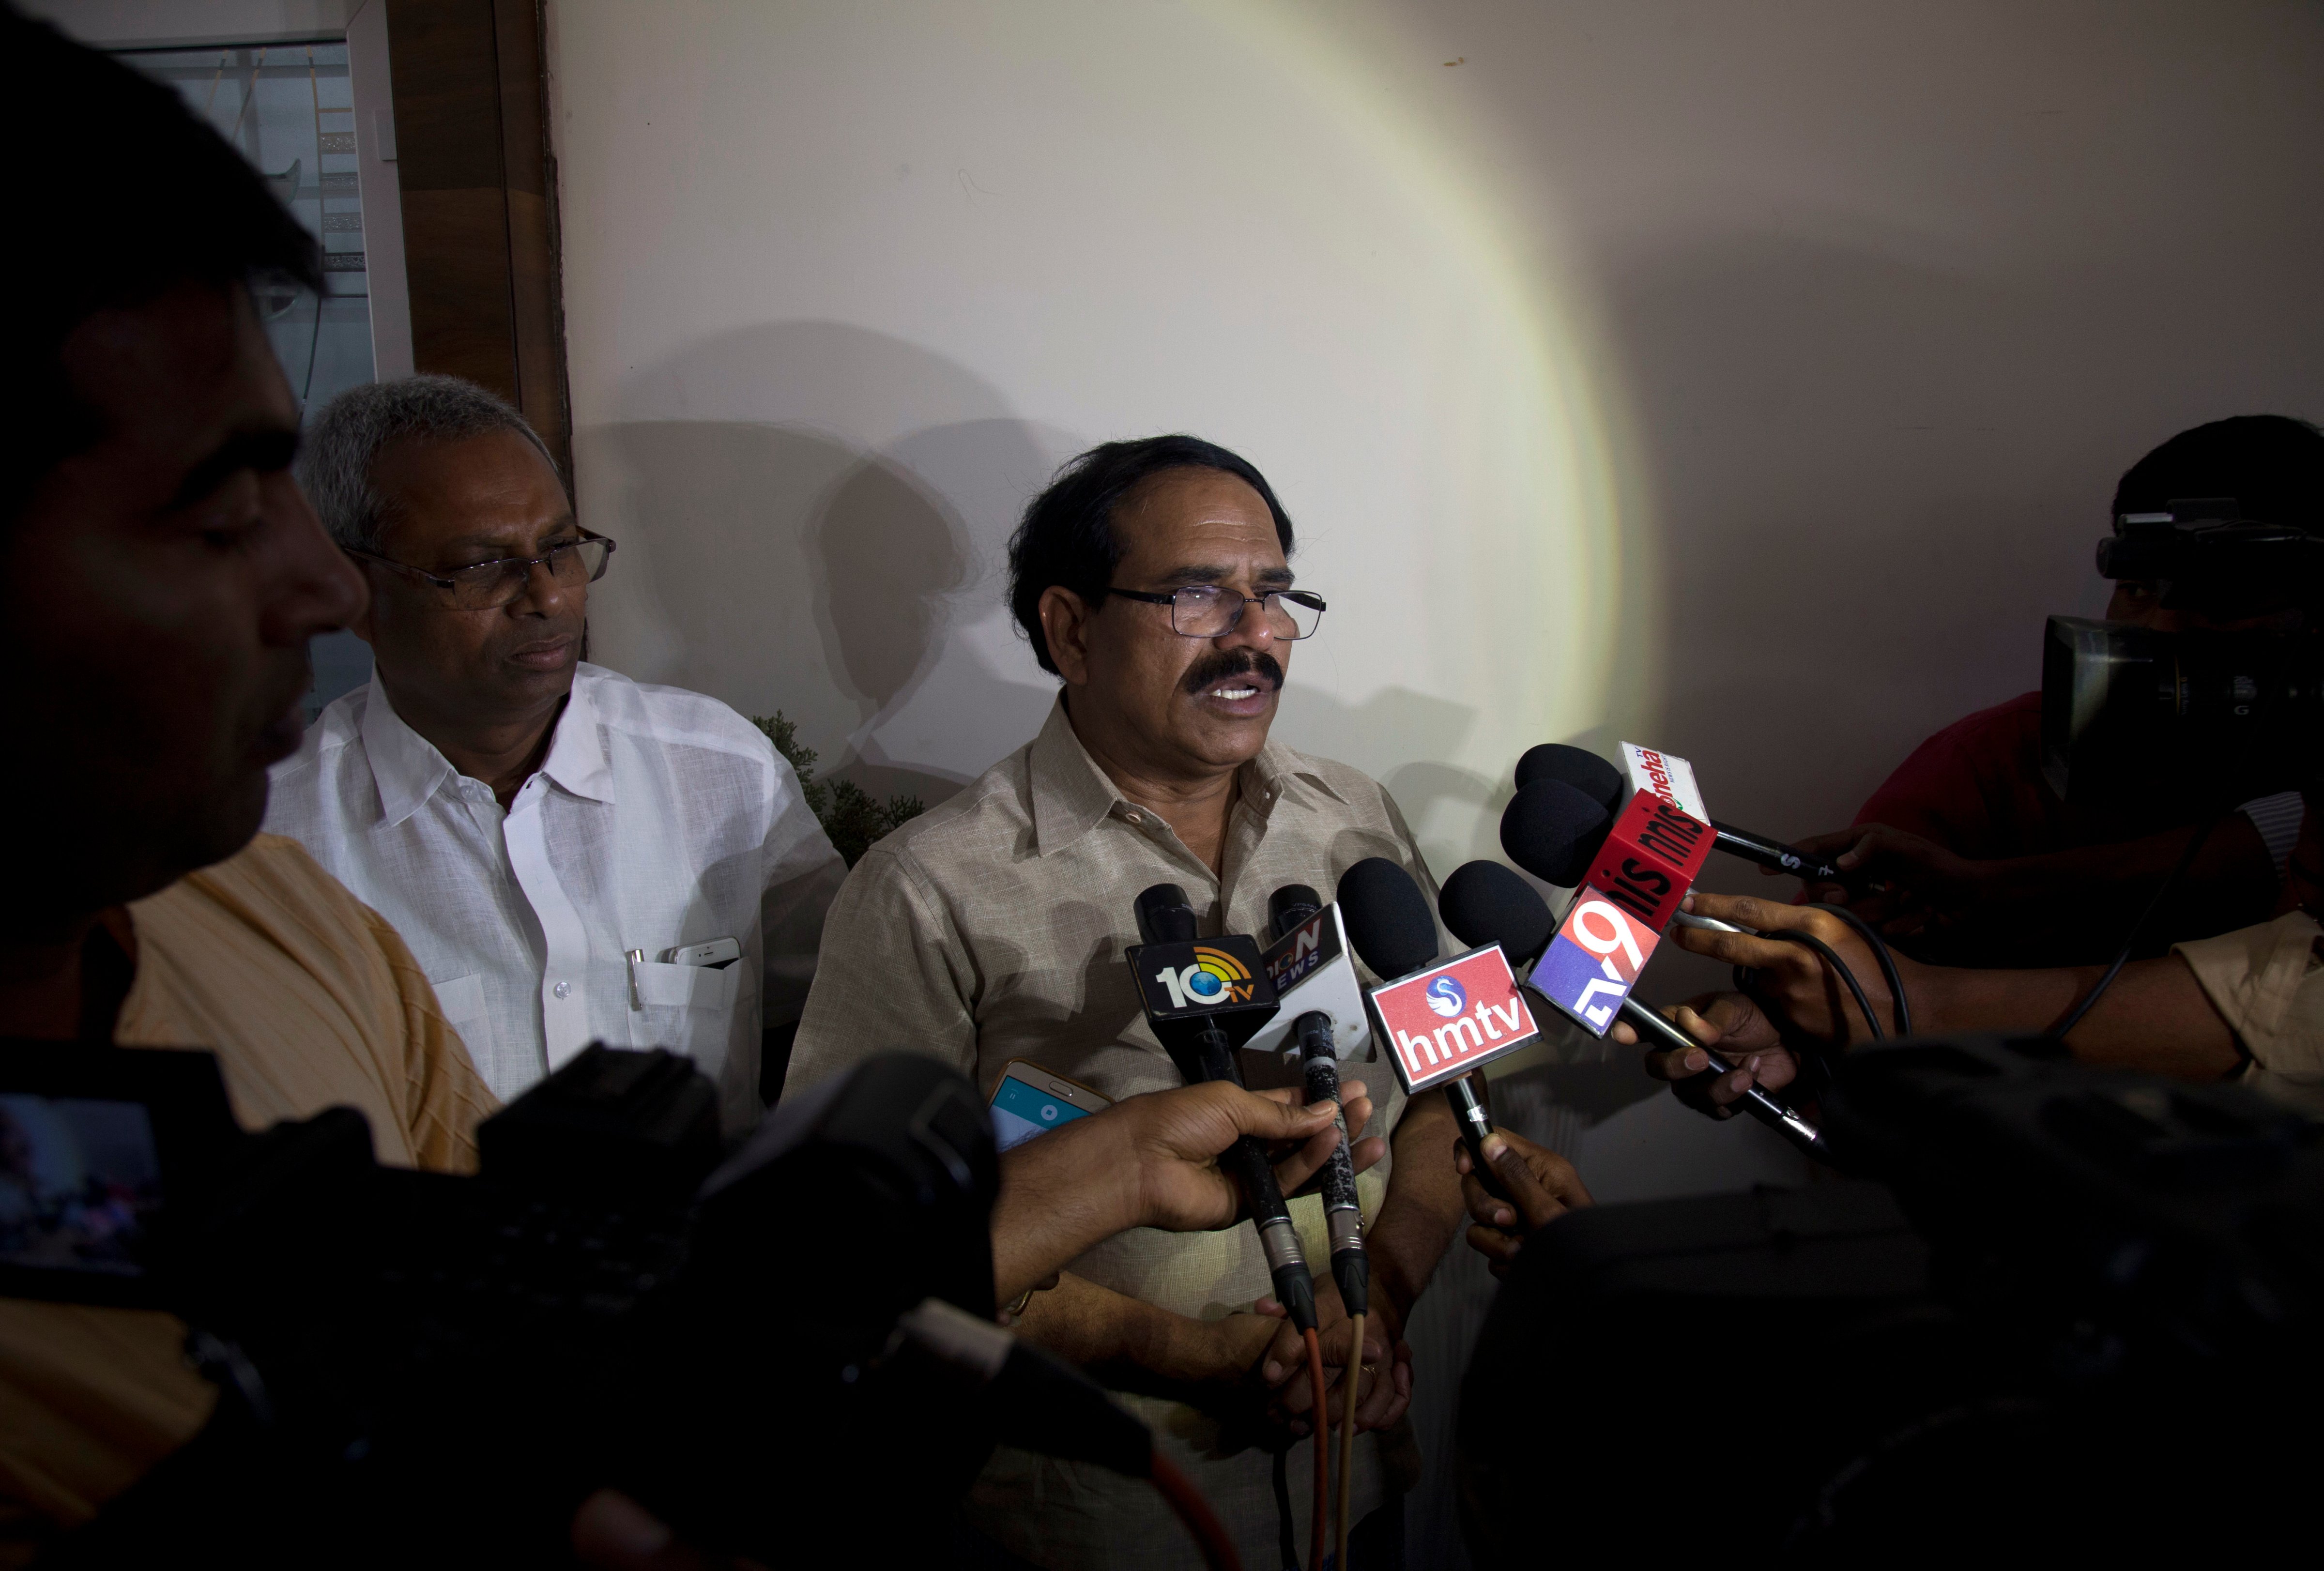 Jaganmohan Reddy, father of Alok Madasani, an engineer who was injured in the shooting Wednesday night in a crowded suburban Kansas City bar, speaks to the media at his residence in Hyderabad, India, on Feb. 24, 2017. (Mahesh Kumar—AP)